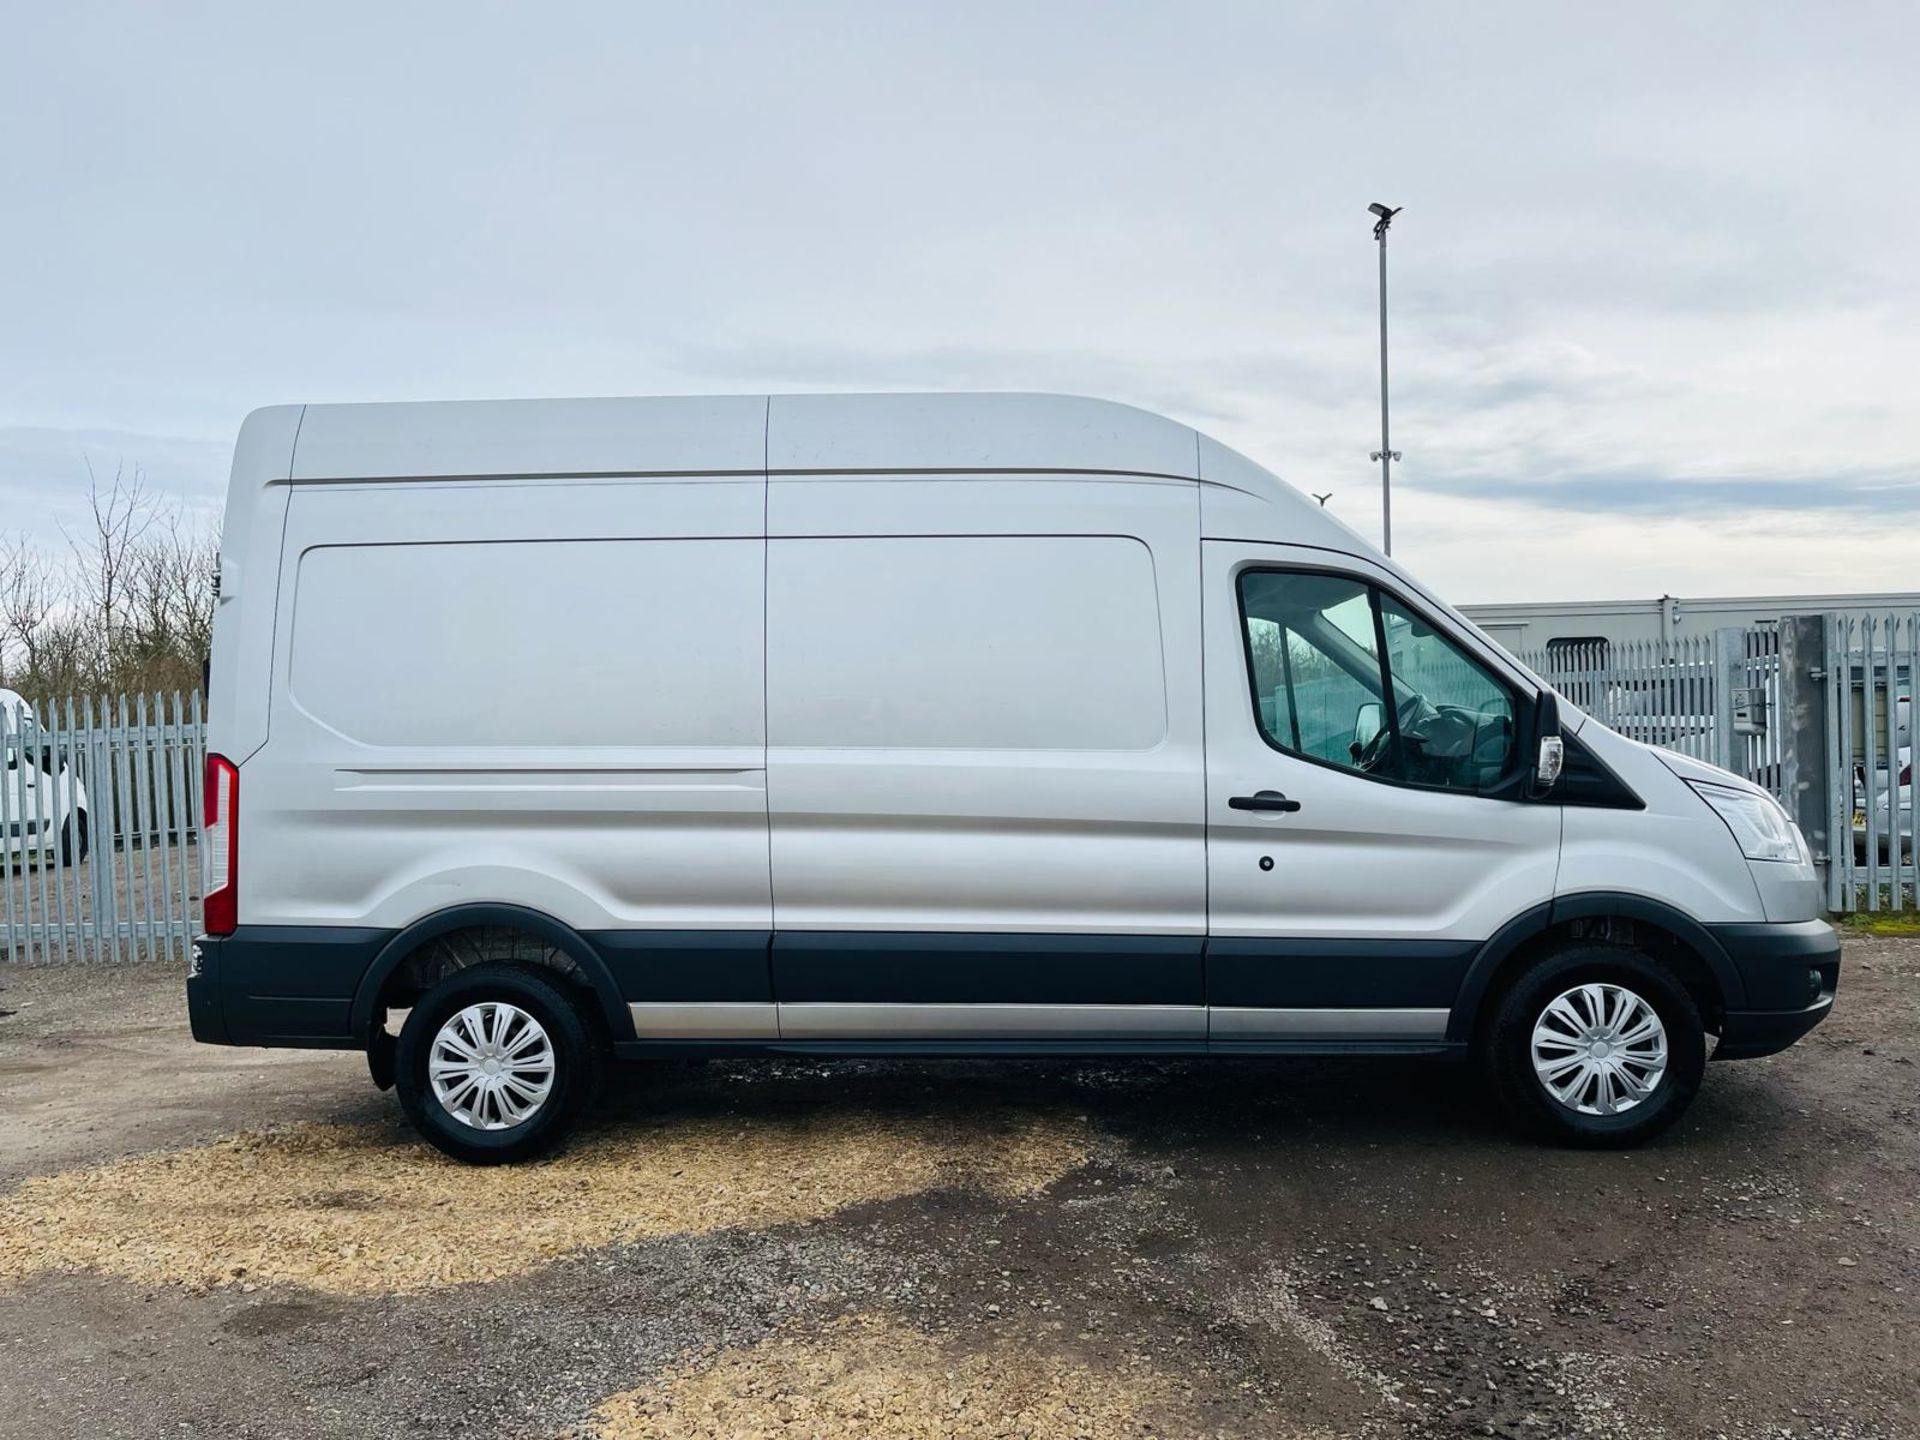 ** ON SALE ** Ford Transit Trend 350 TDCI 125 2.2 L3 H3 2014 '64 Reg' - Parking sensors - Air Con - Image 13 of 27